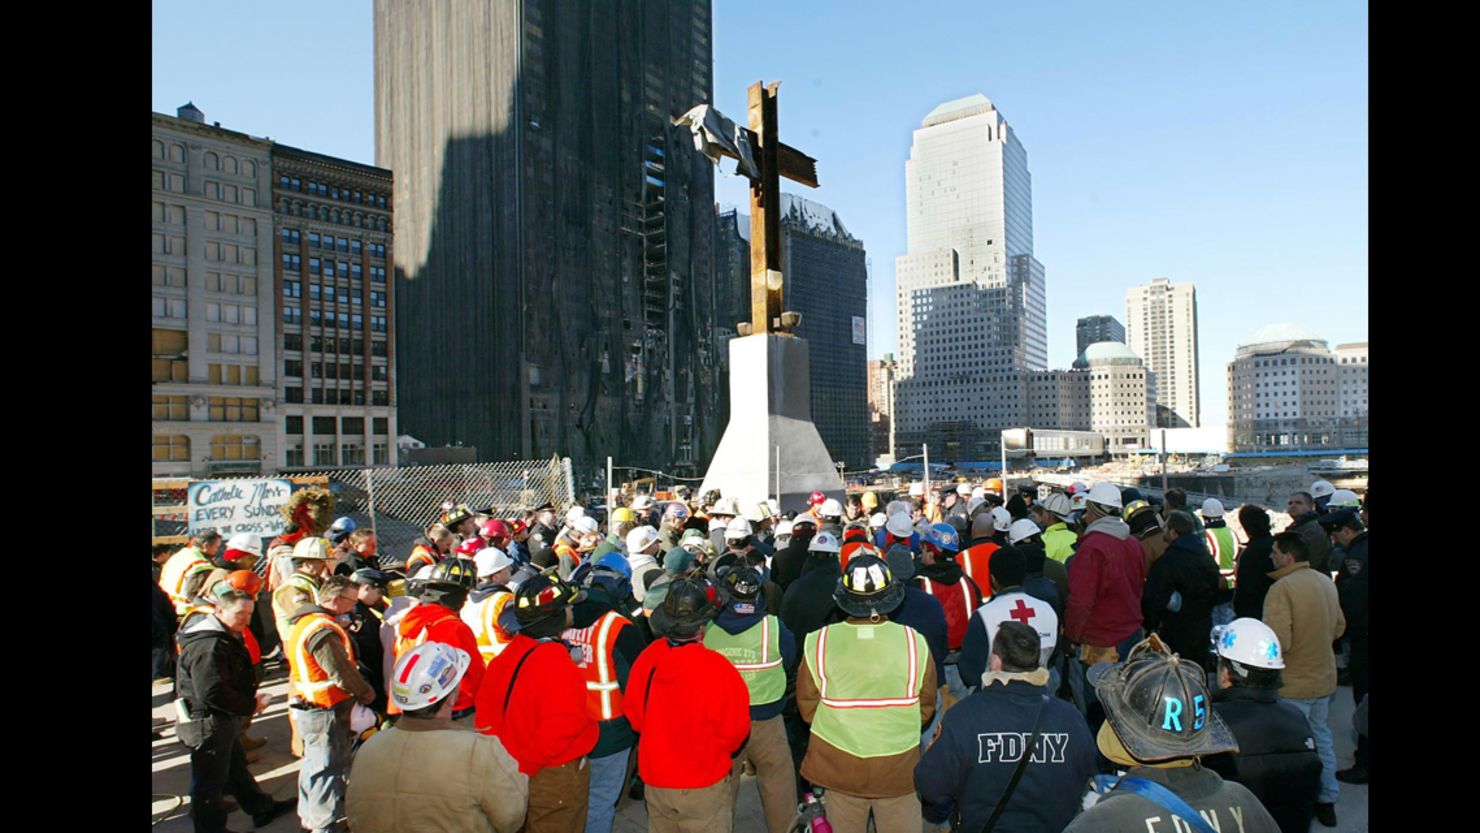 The makeshift steel cross at "Ground Zero" was the subject of a lawsuit.TIMOTHY A. CLARY/AFP/Getty Images)